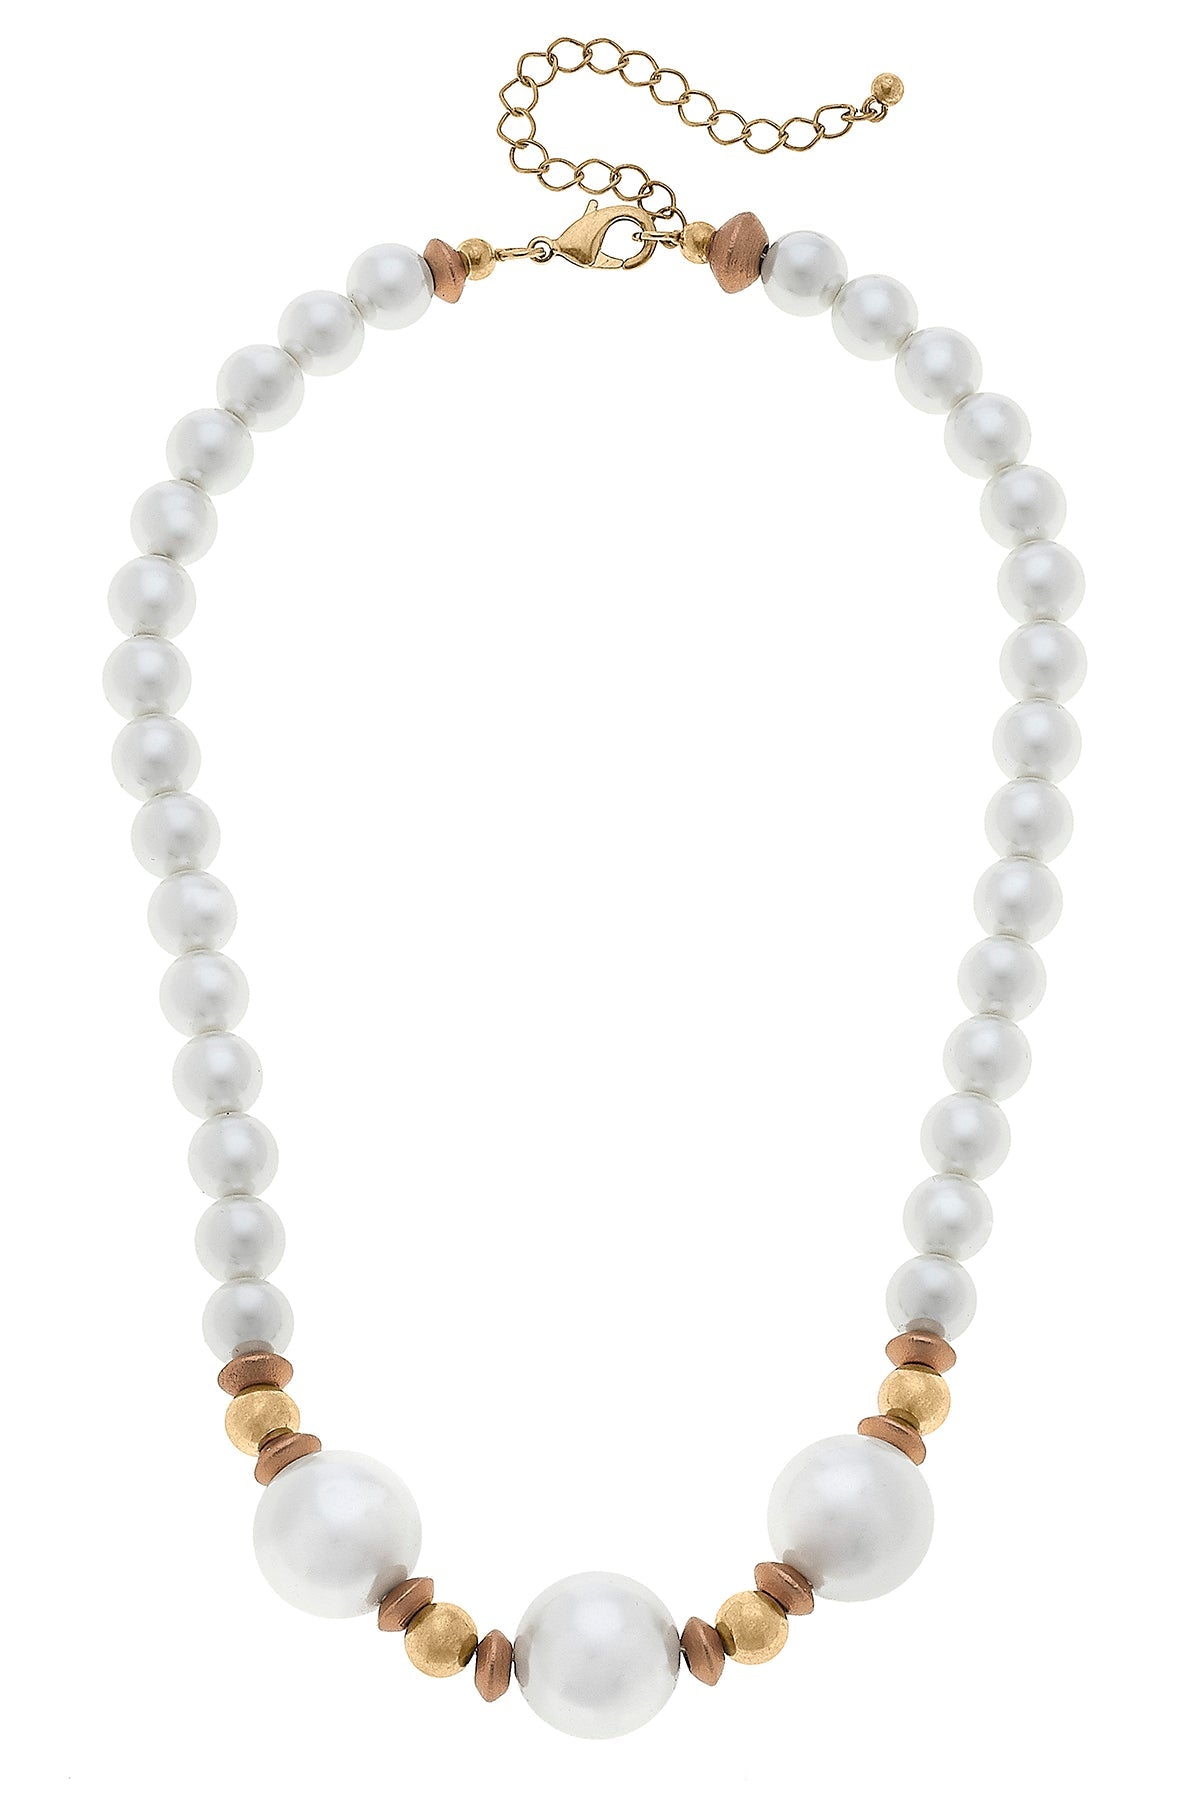 Moira Pearl, Wood & Gold Bead Necklace in Ivory